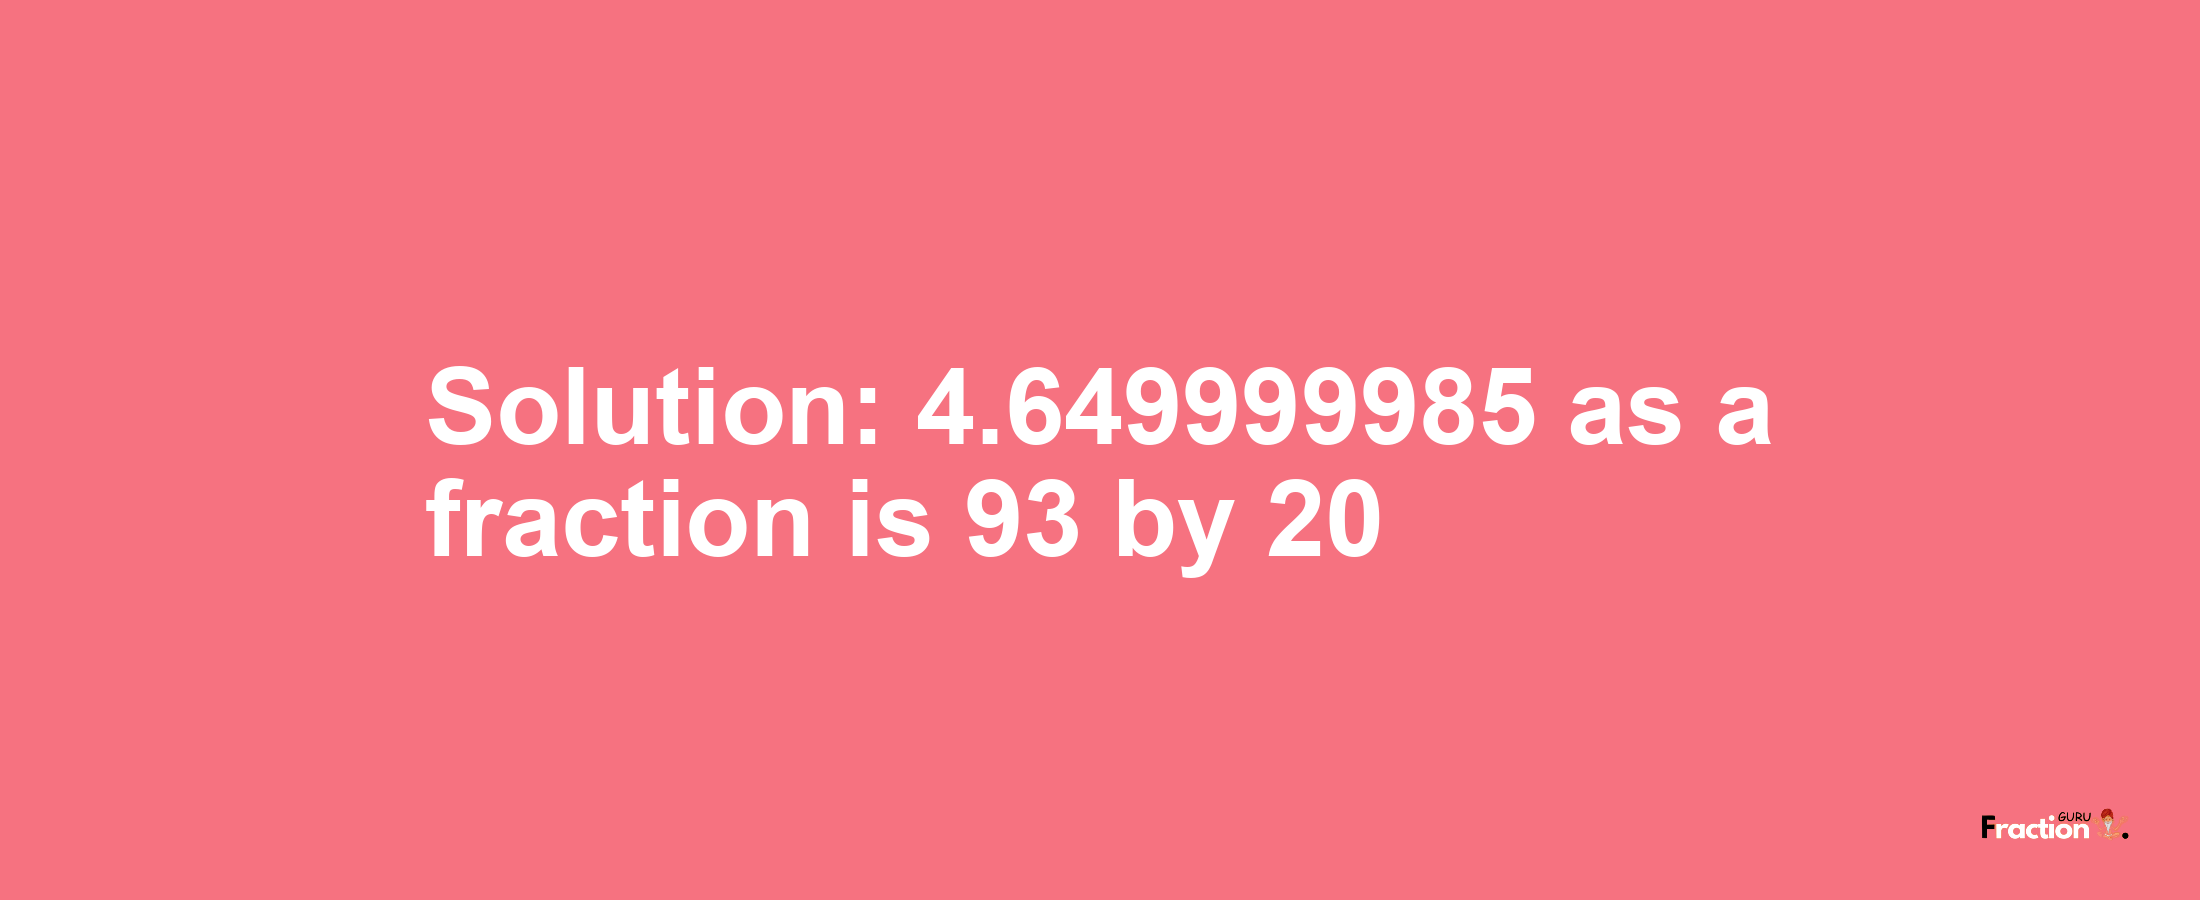 Solution:4.649999985 as a fraction is 93/20